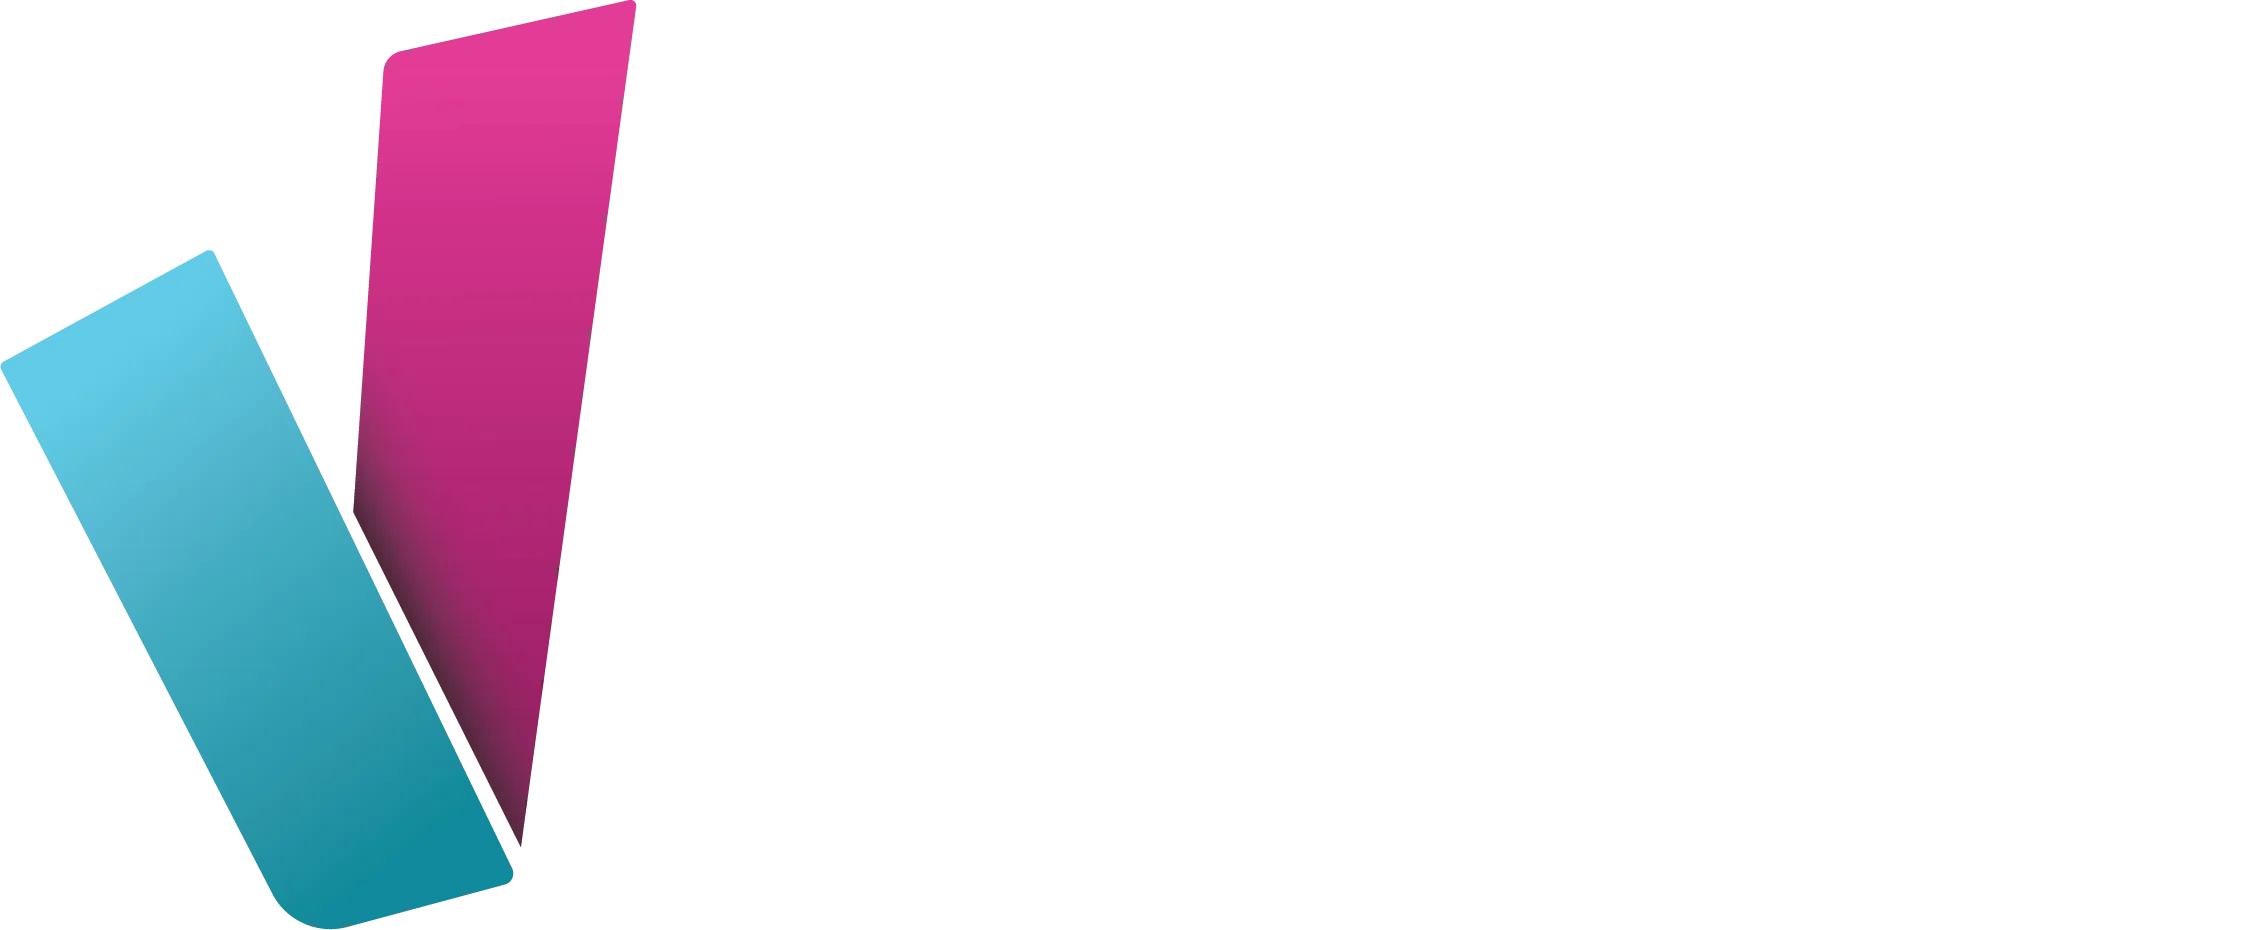 Powered by Schoolvision